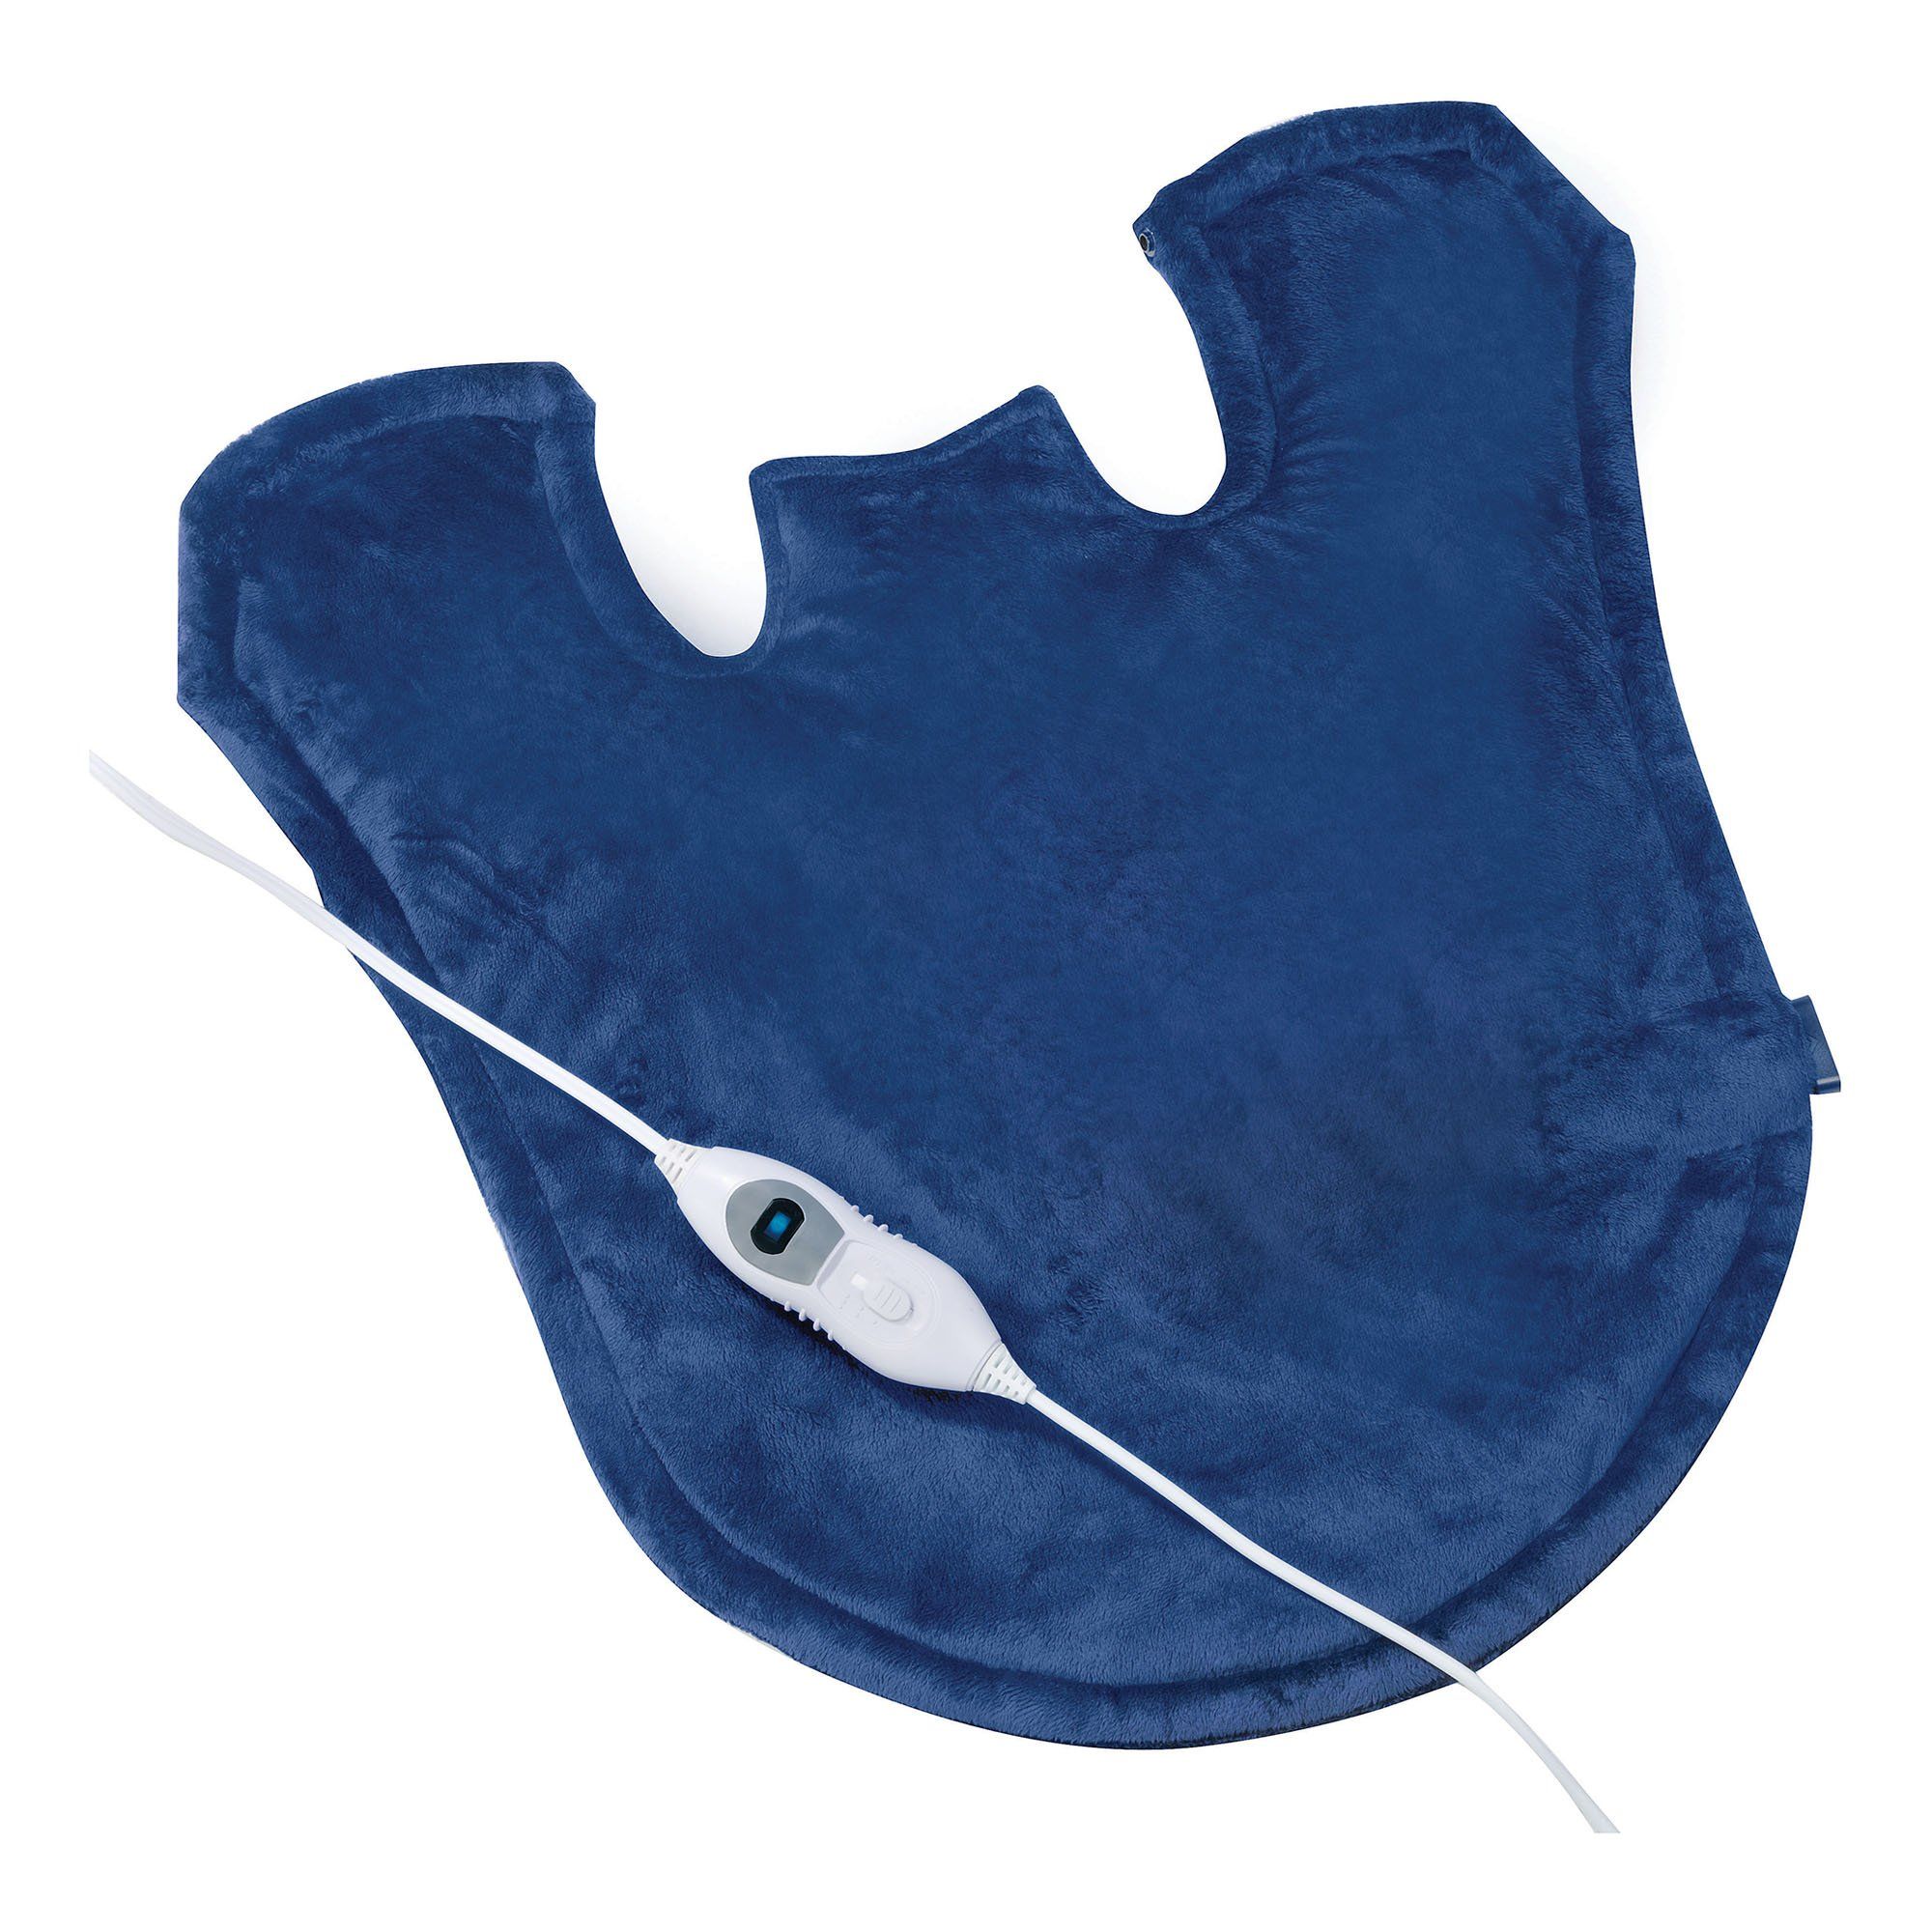 Theracare Heating Pad for Neck, Shoulder & Back - One Size Fits Most